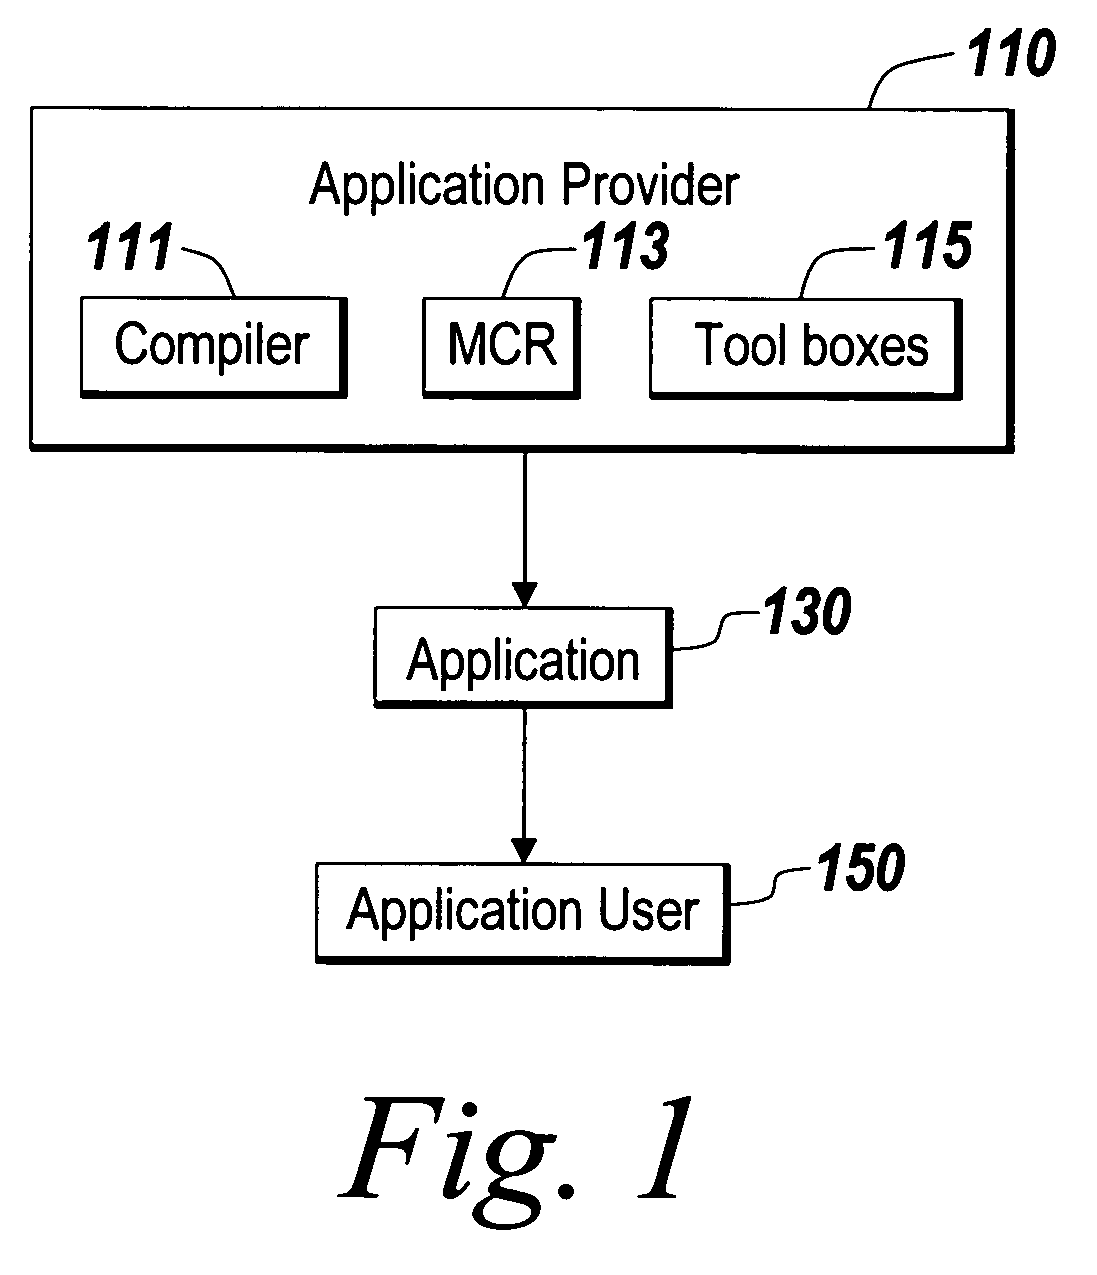 Deploying and distributing of applications and software components